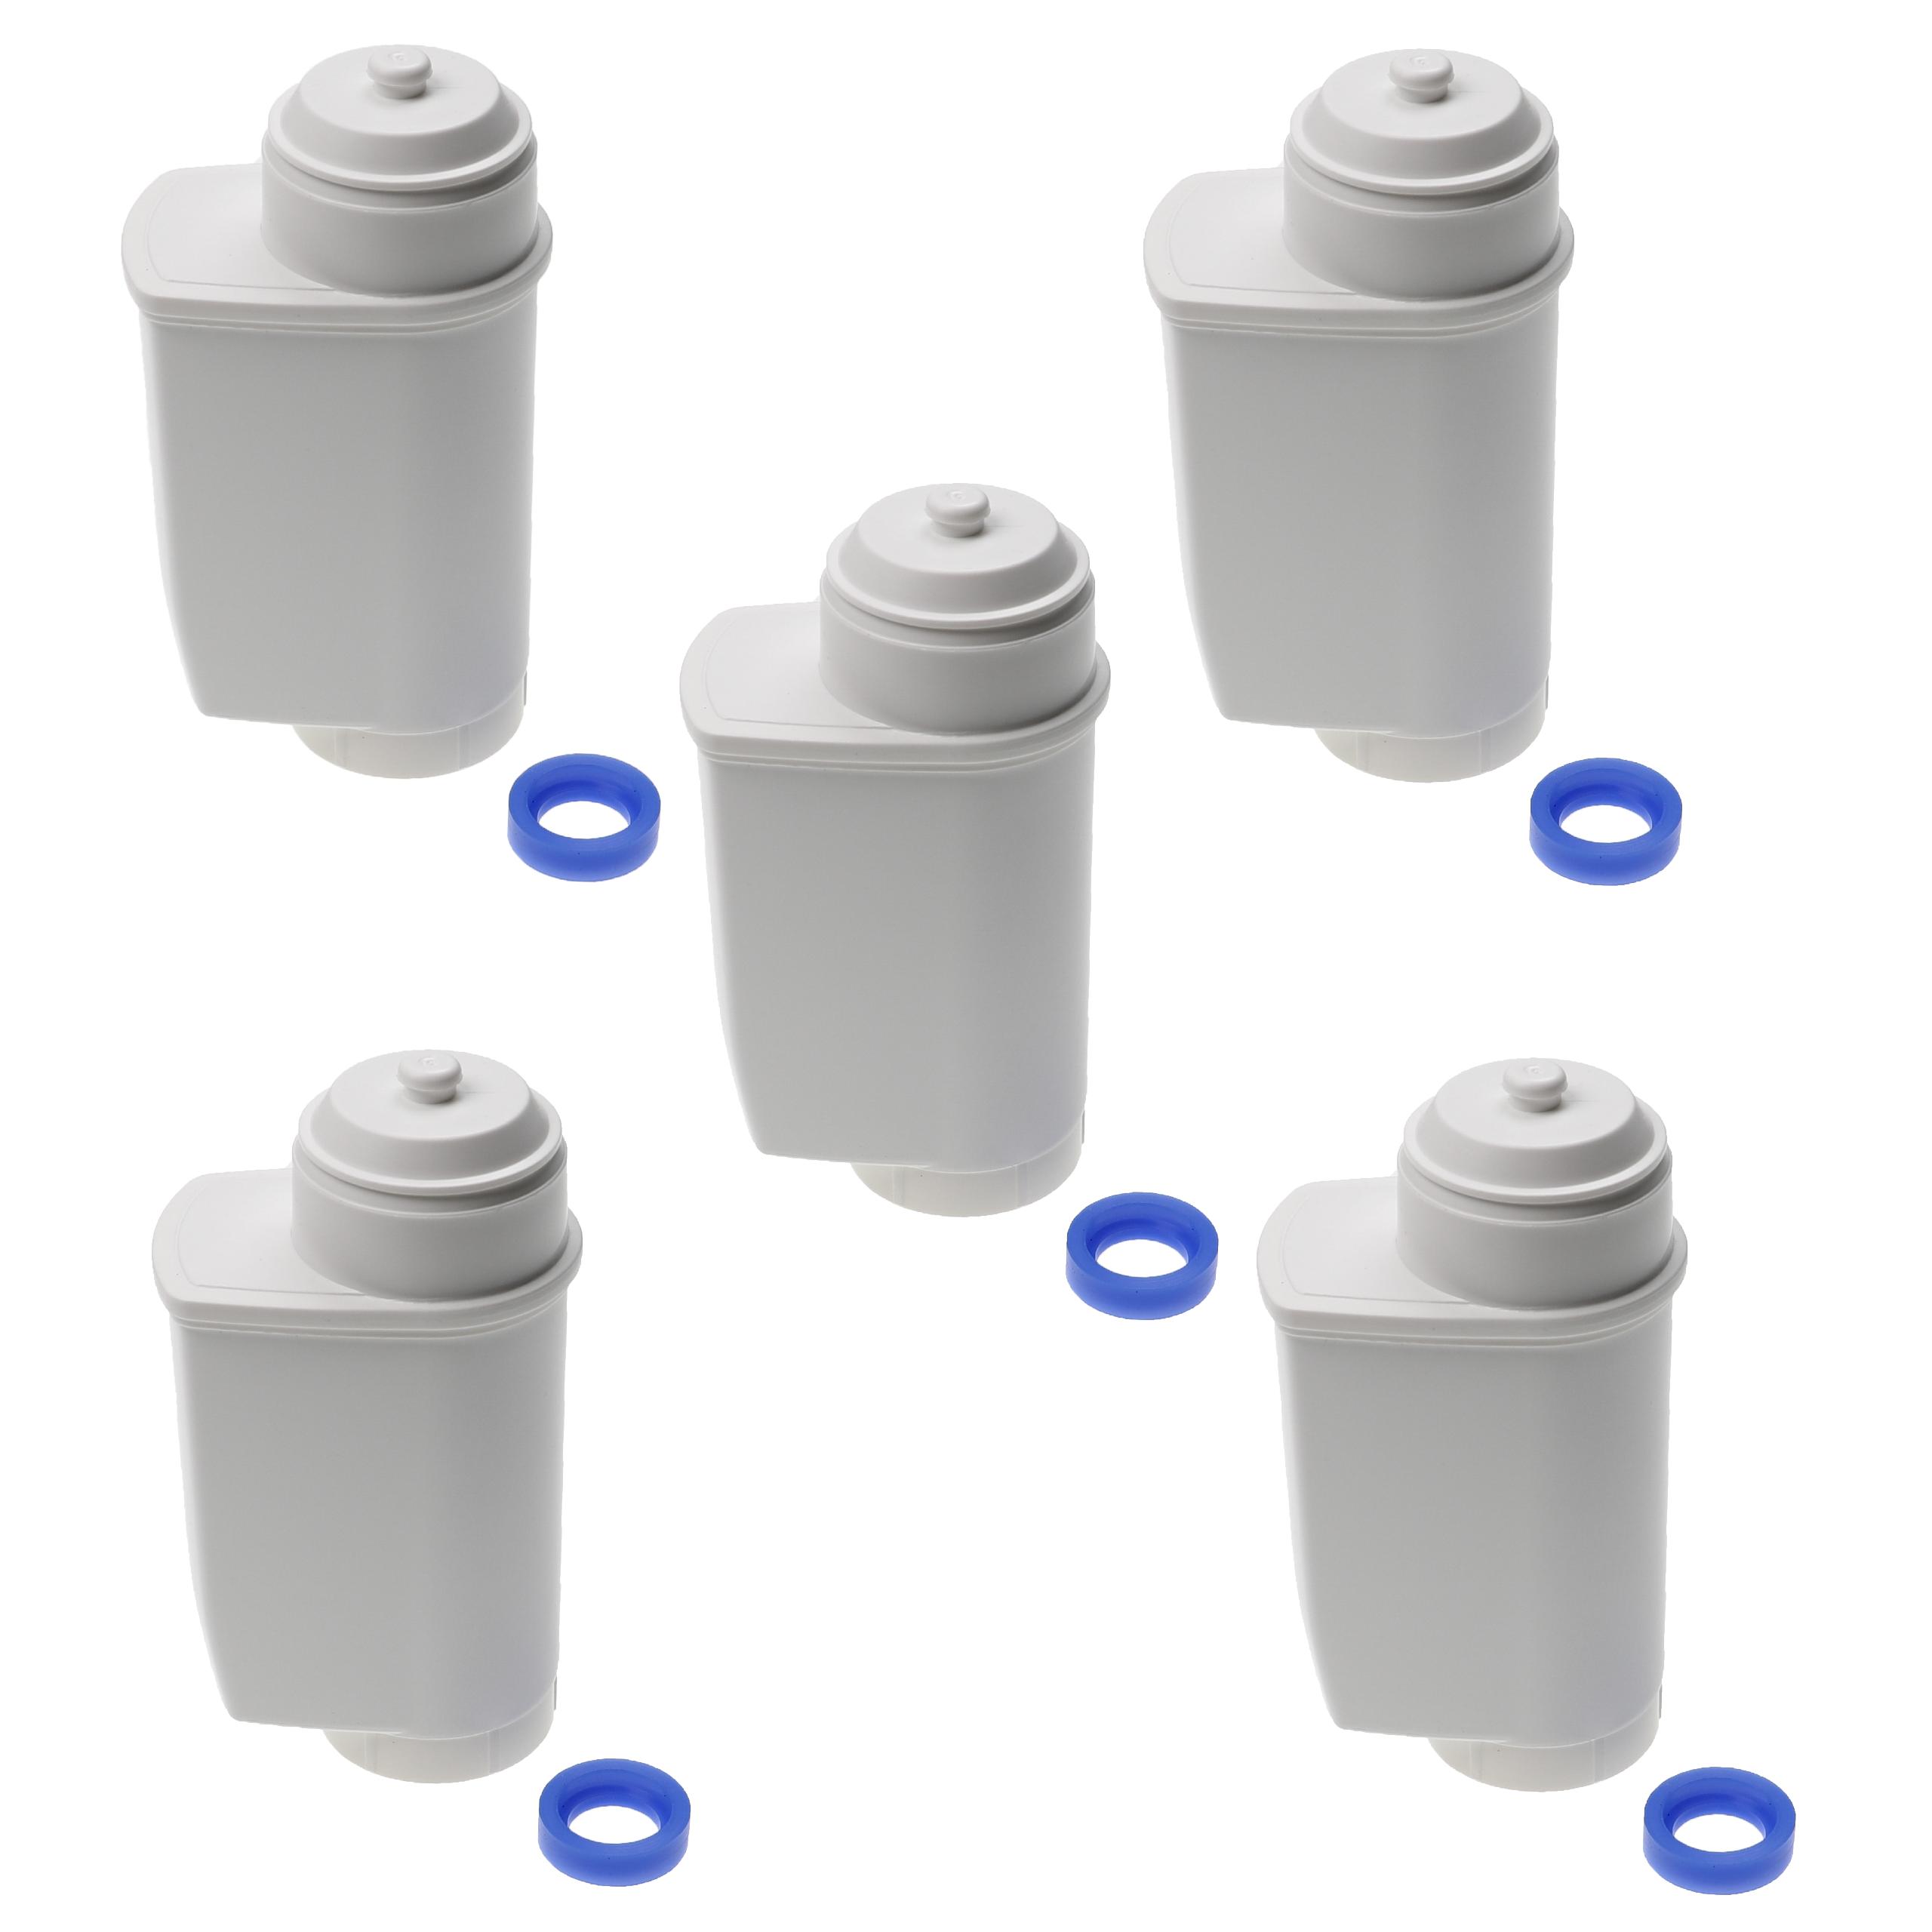 5x Water Filter replaces Siemens TZ70033 for Bosch Coffee Machine etc. - White